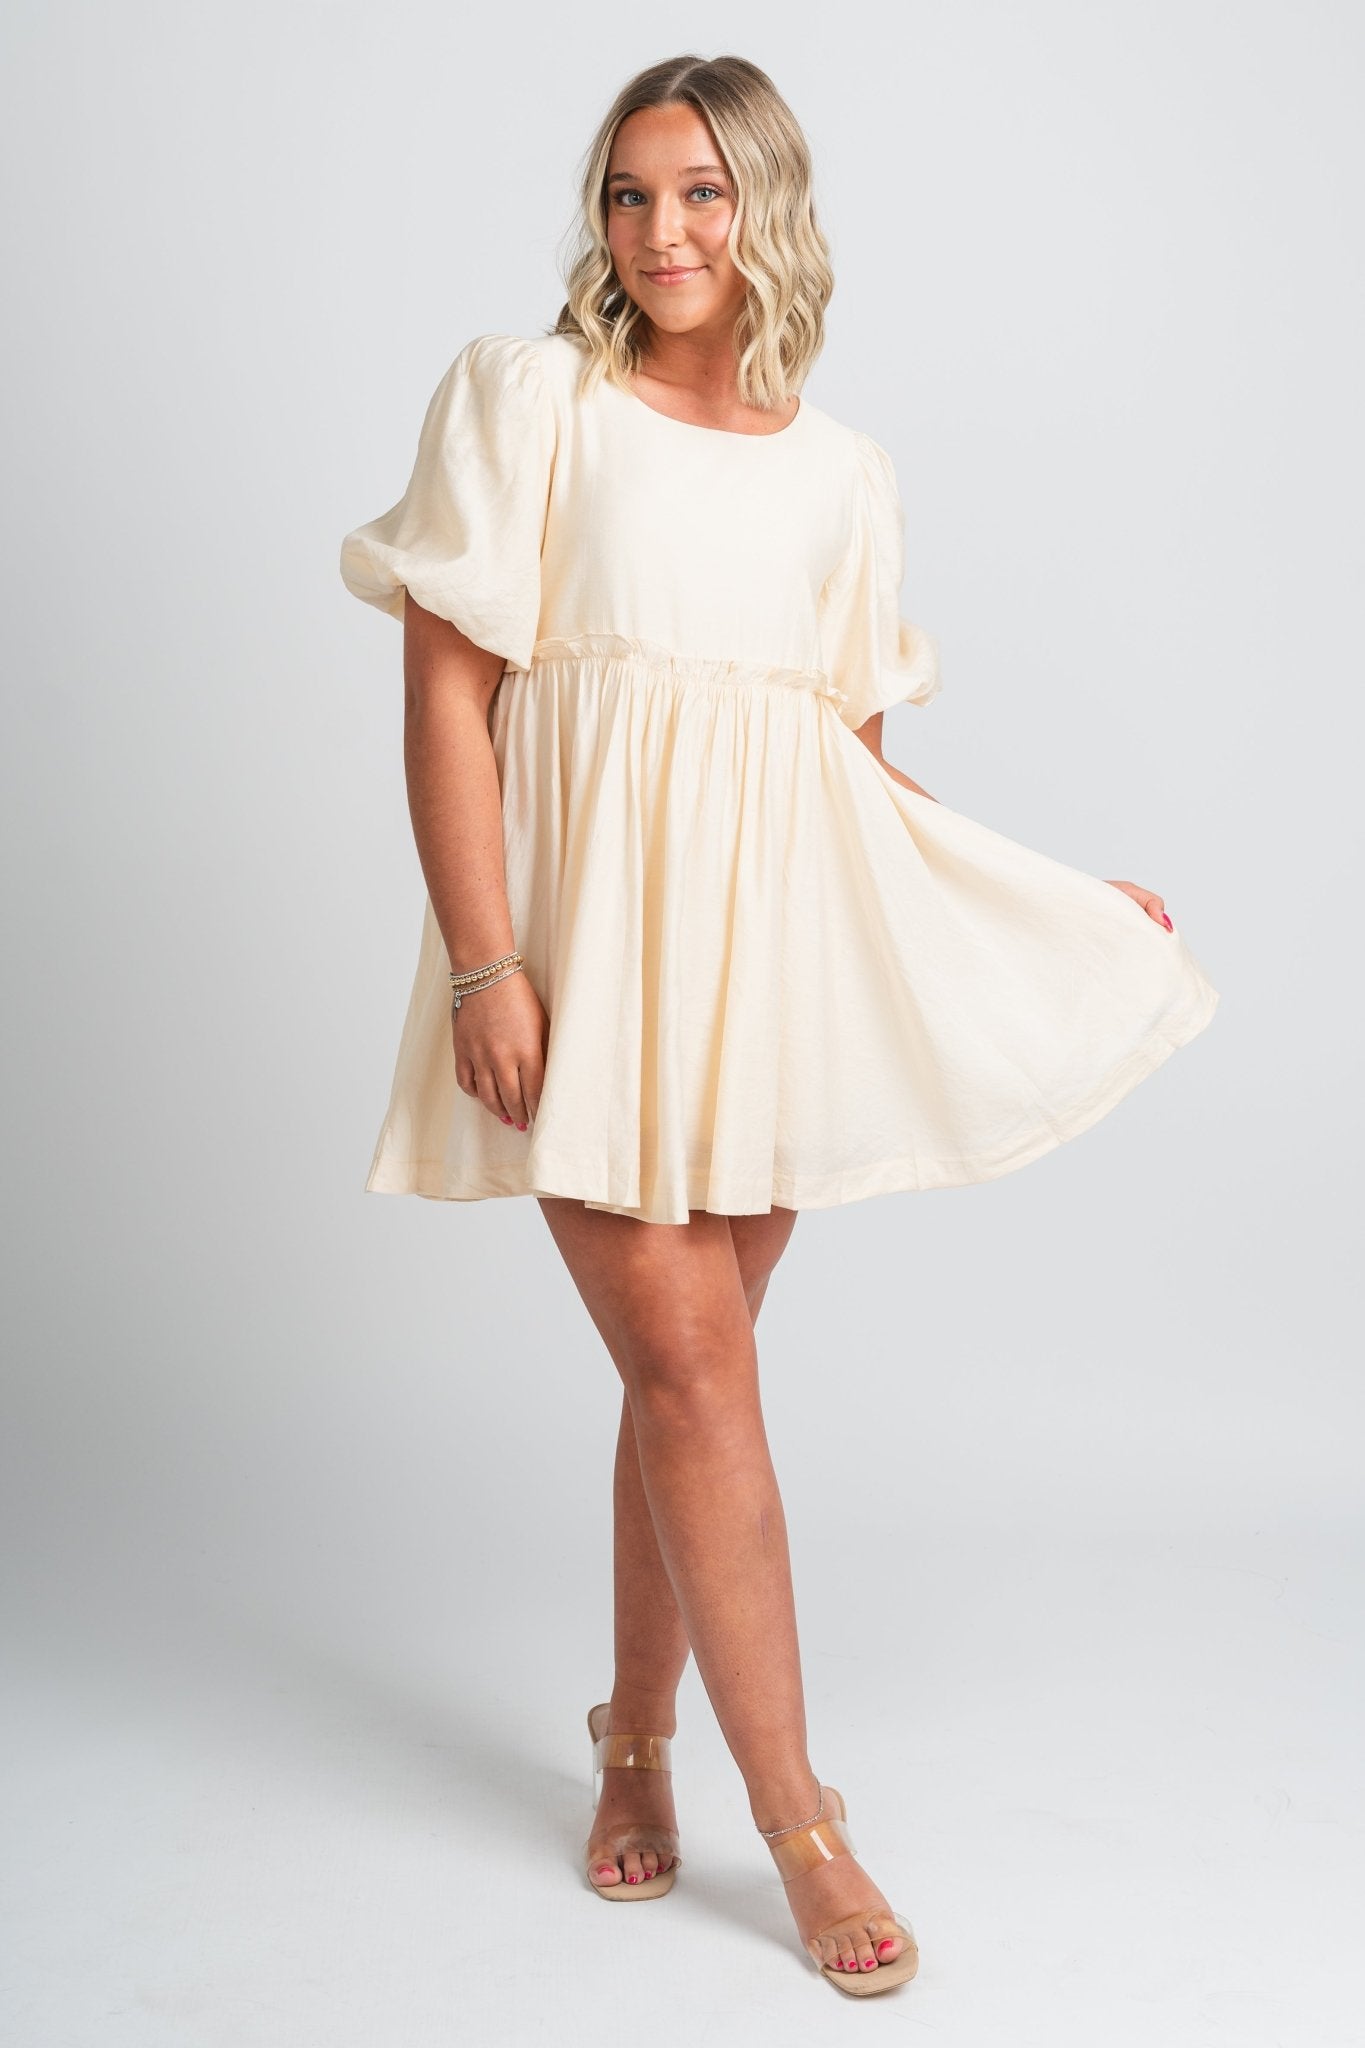 Puff sleeve mini dress cream - Cute Dress - Trendy Easter Clothing Line at Lush Fashion Lounge Boutique in Oklahoma